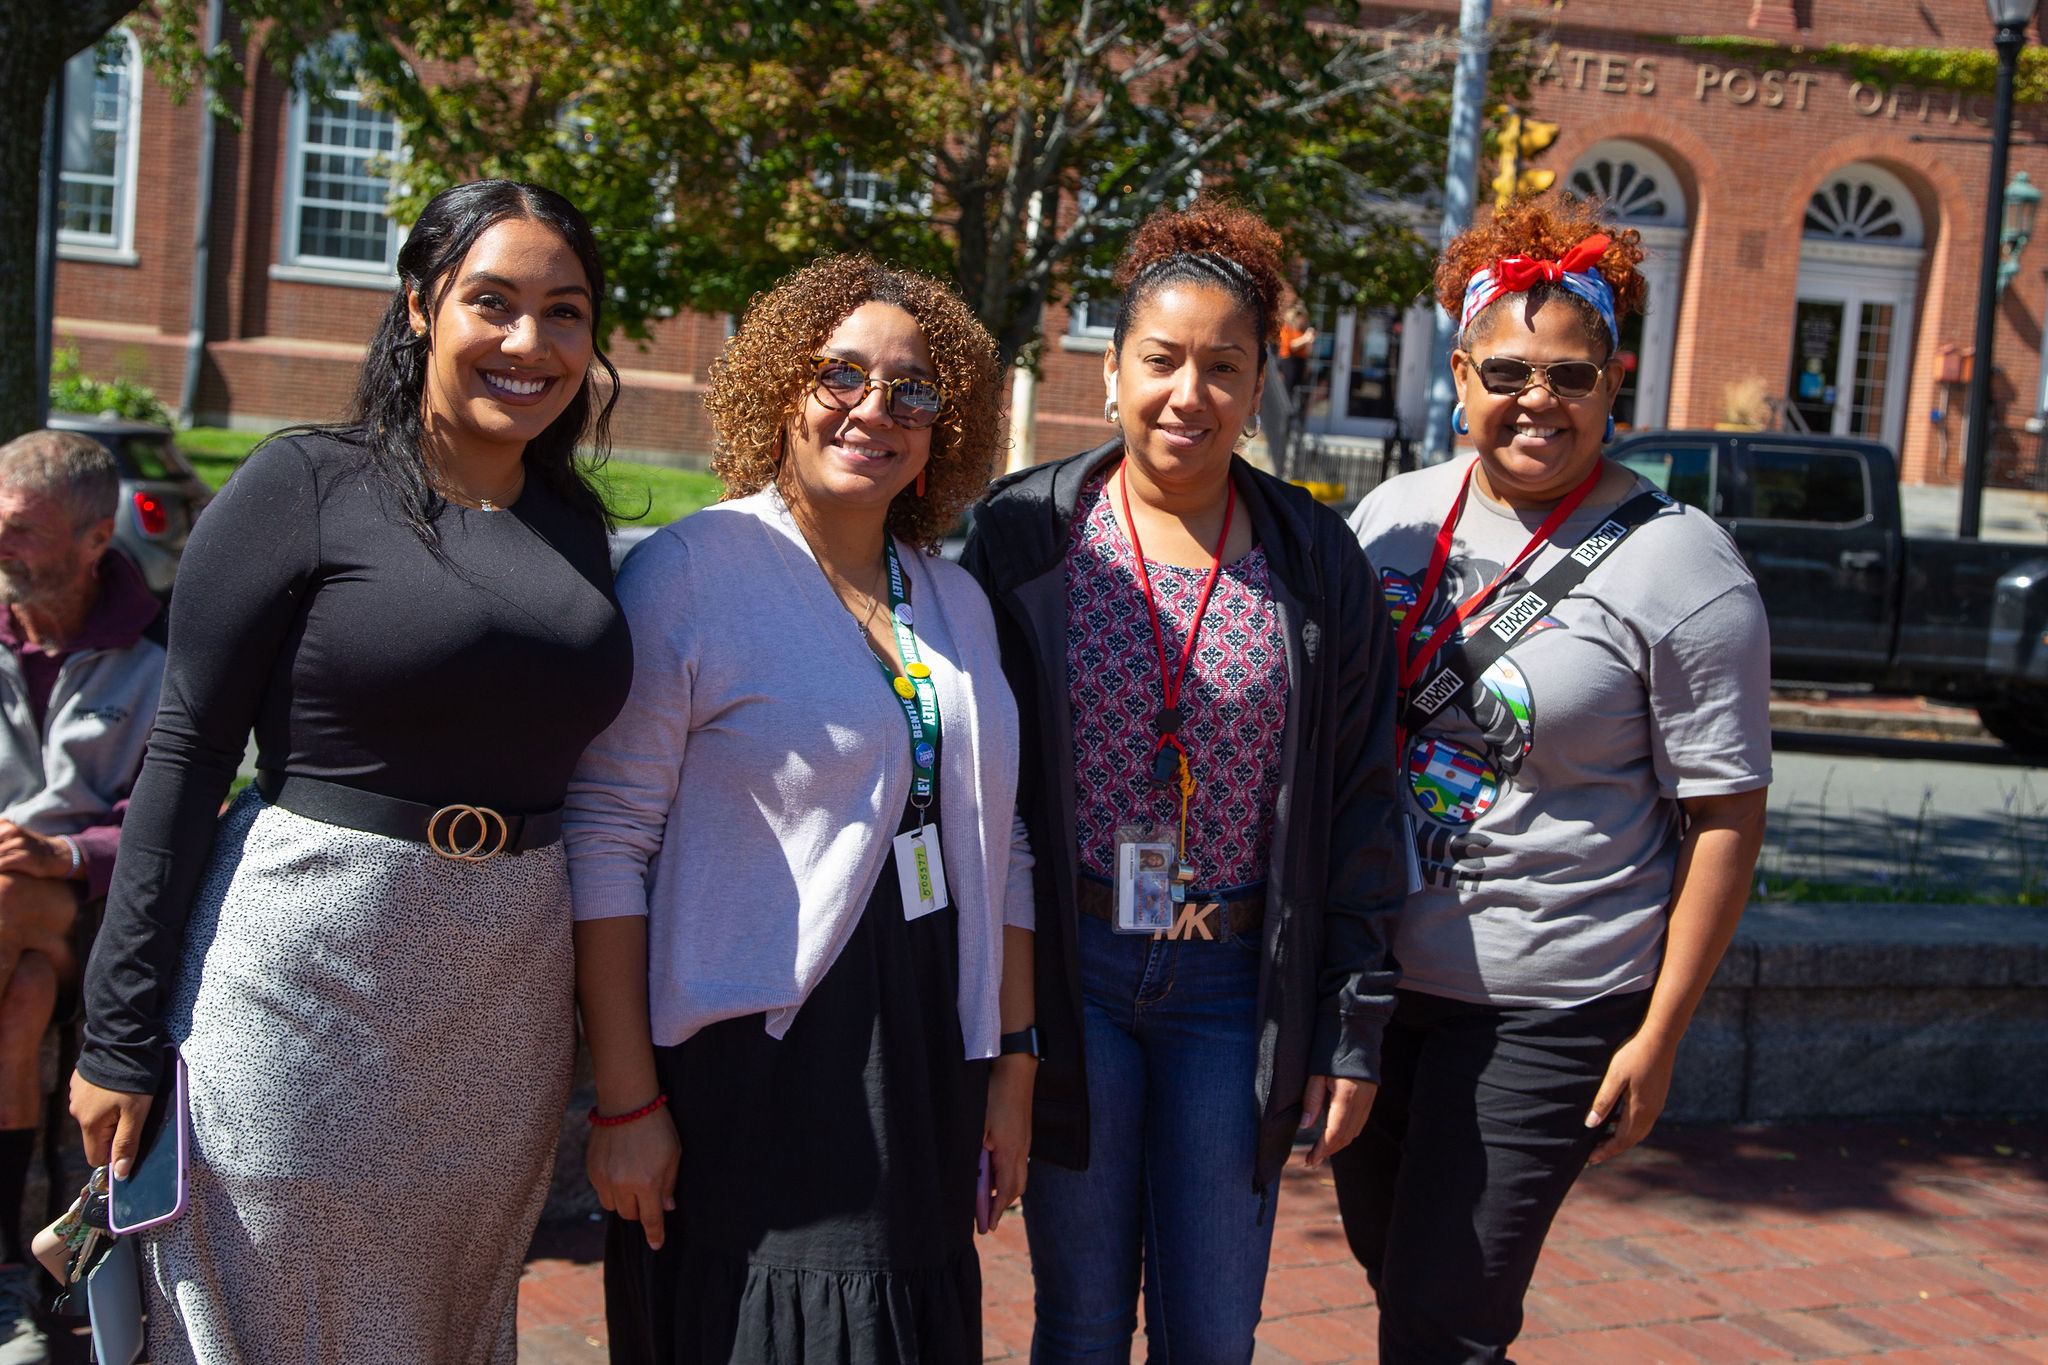 Four young latina woman smile for the camera during the Latinx heritage flag raising in Salem